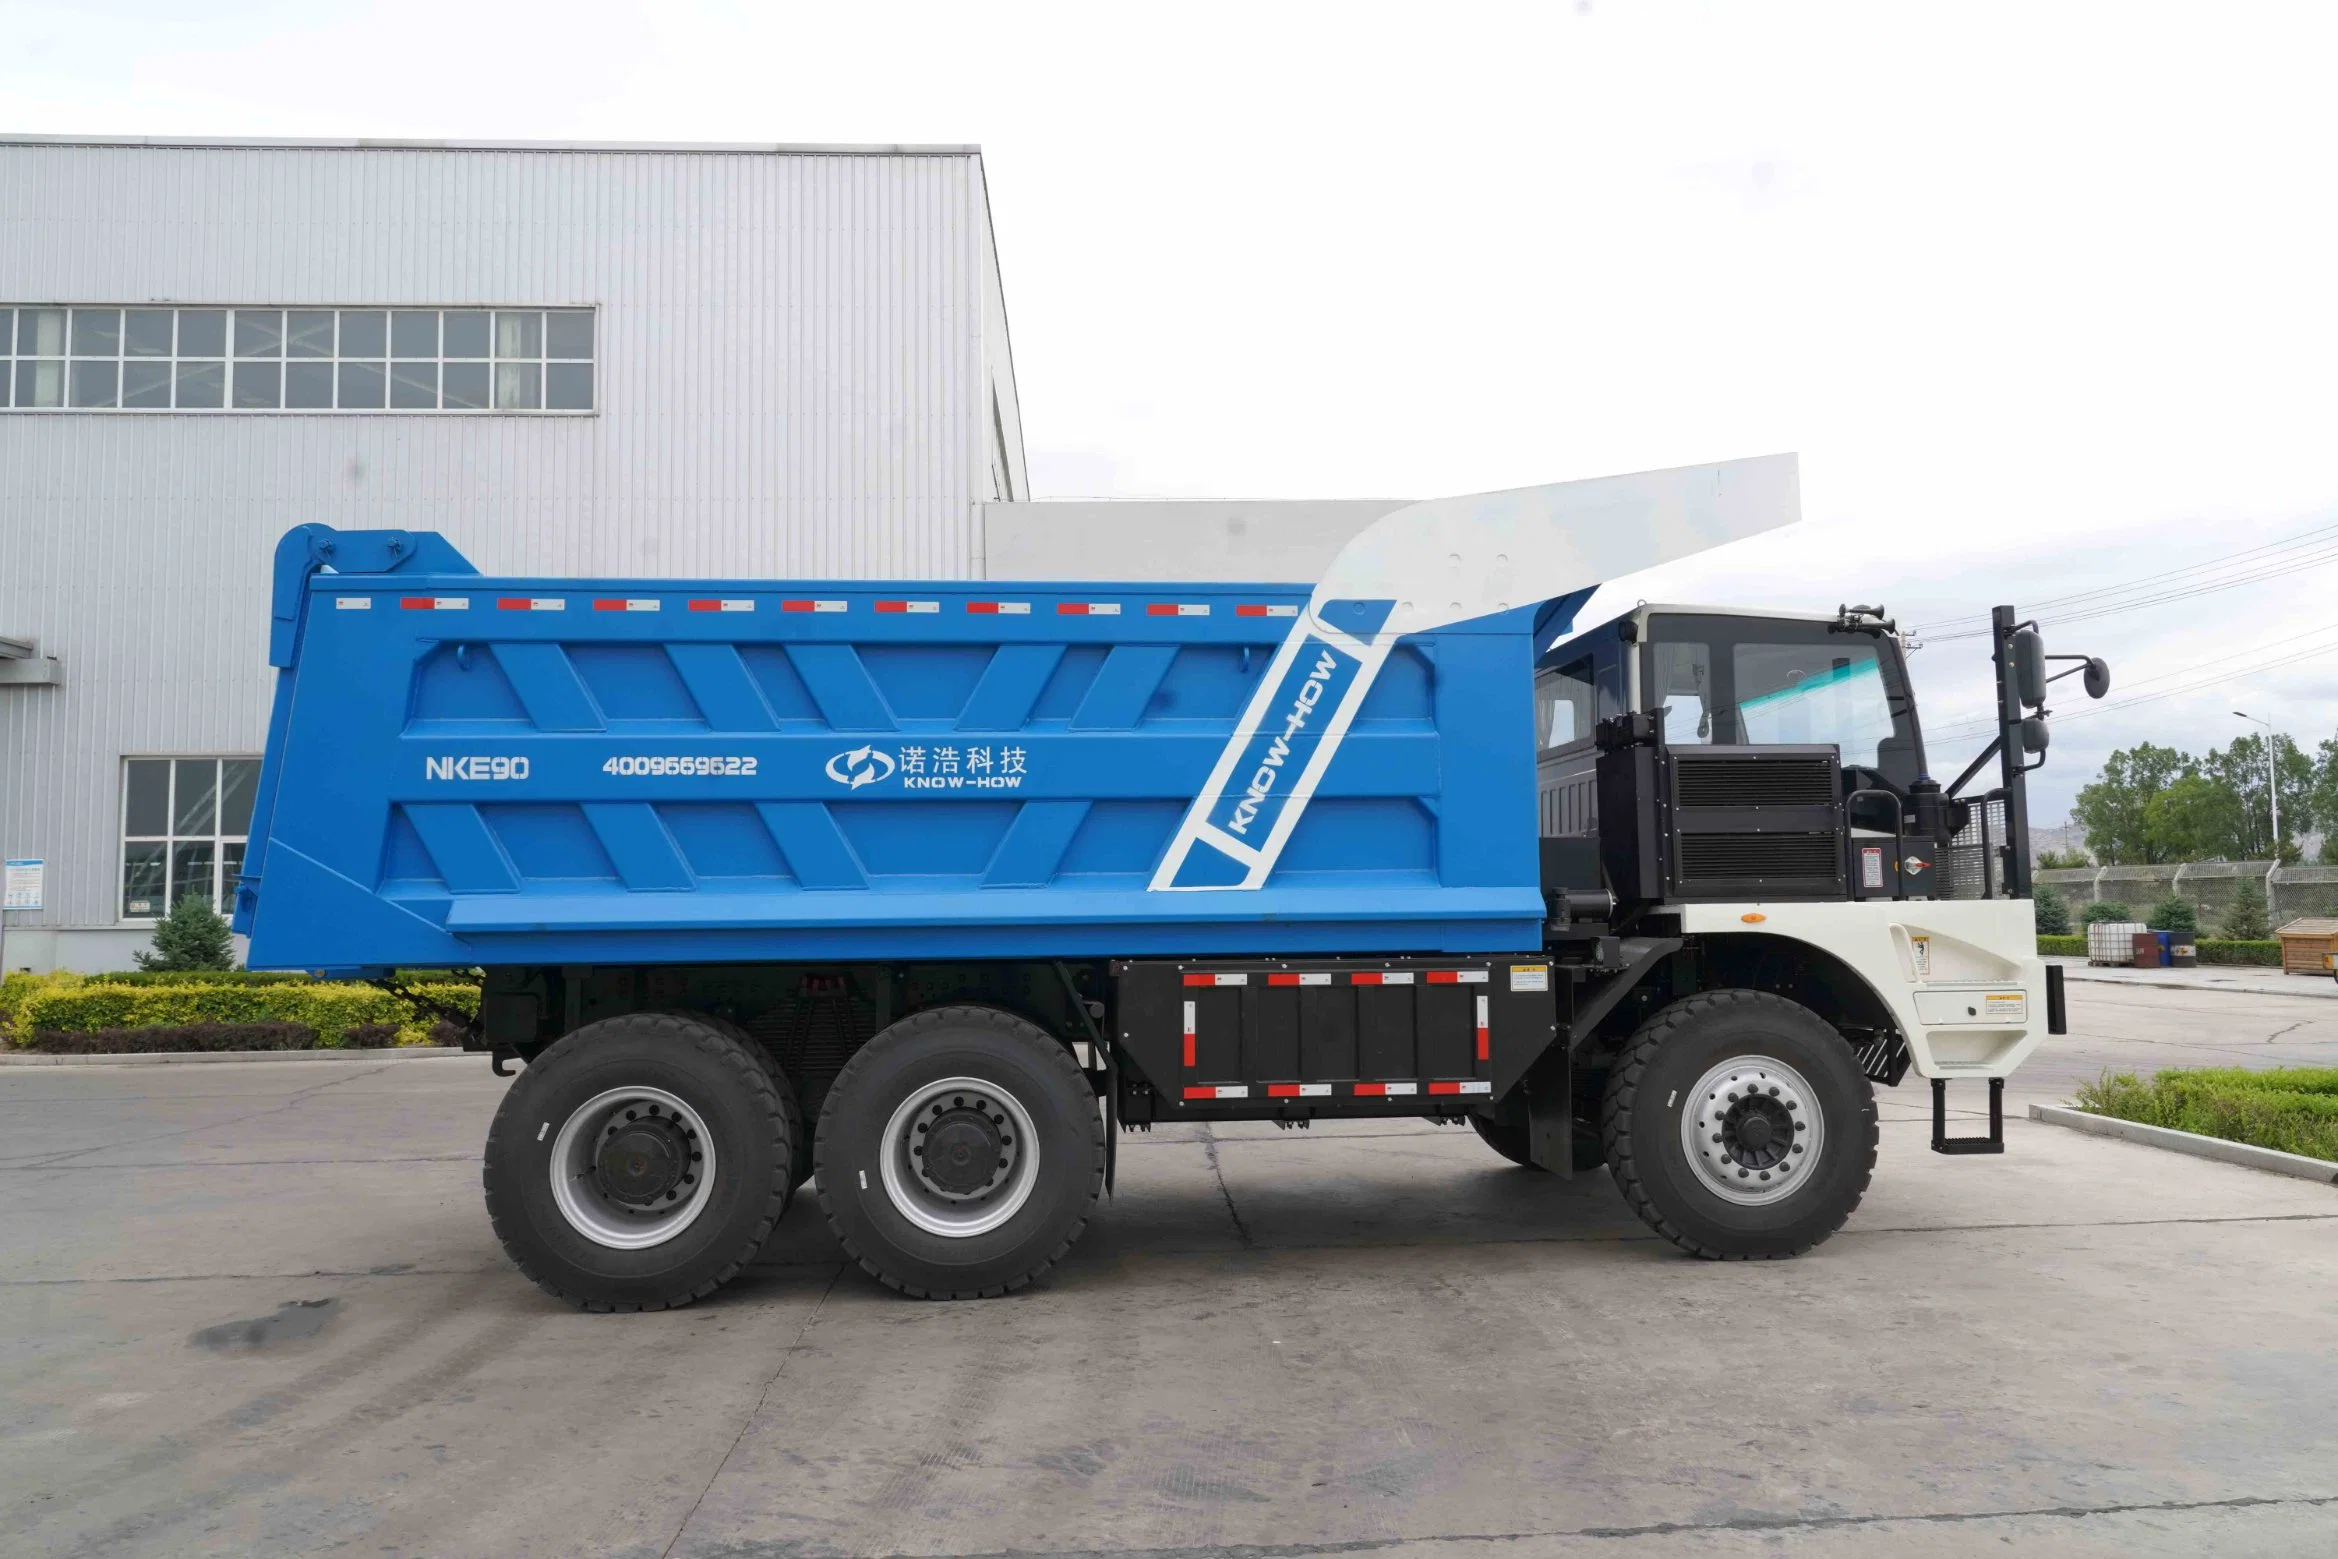 Nke90c Heavy Duty Load 90 Tons 6*4 Electric Mining Dump Truck Tipper with Good Price